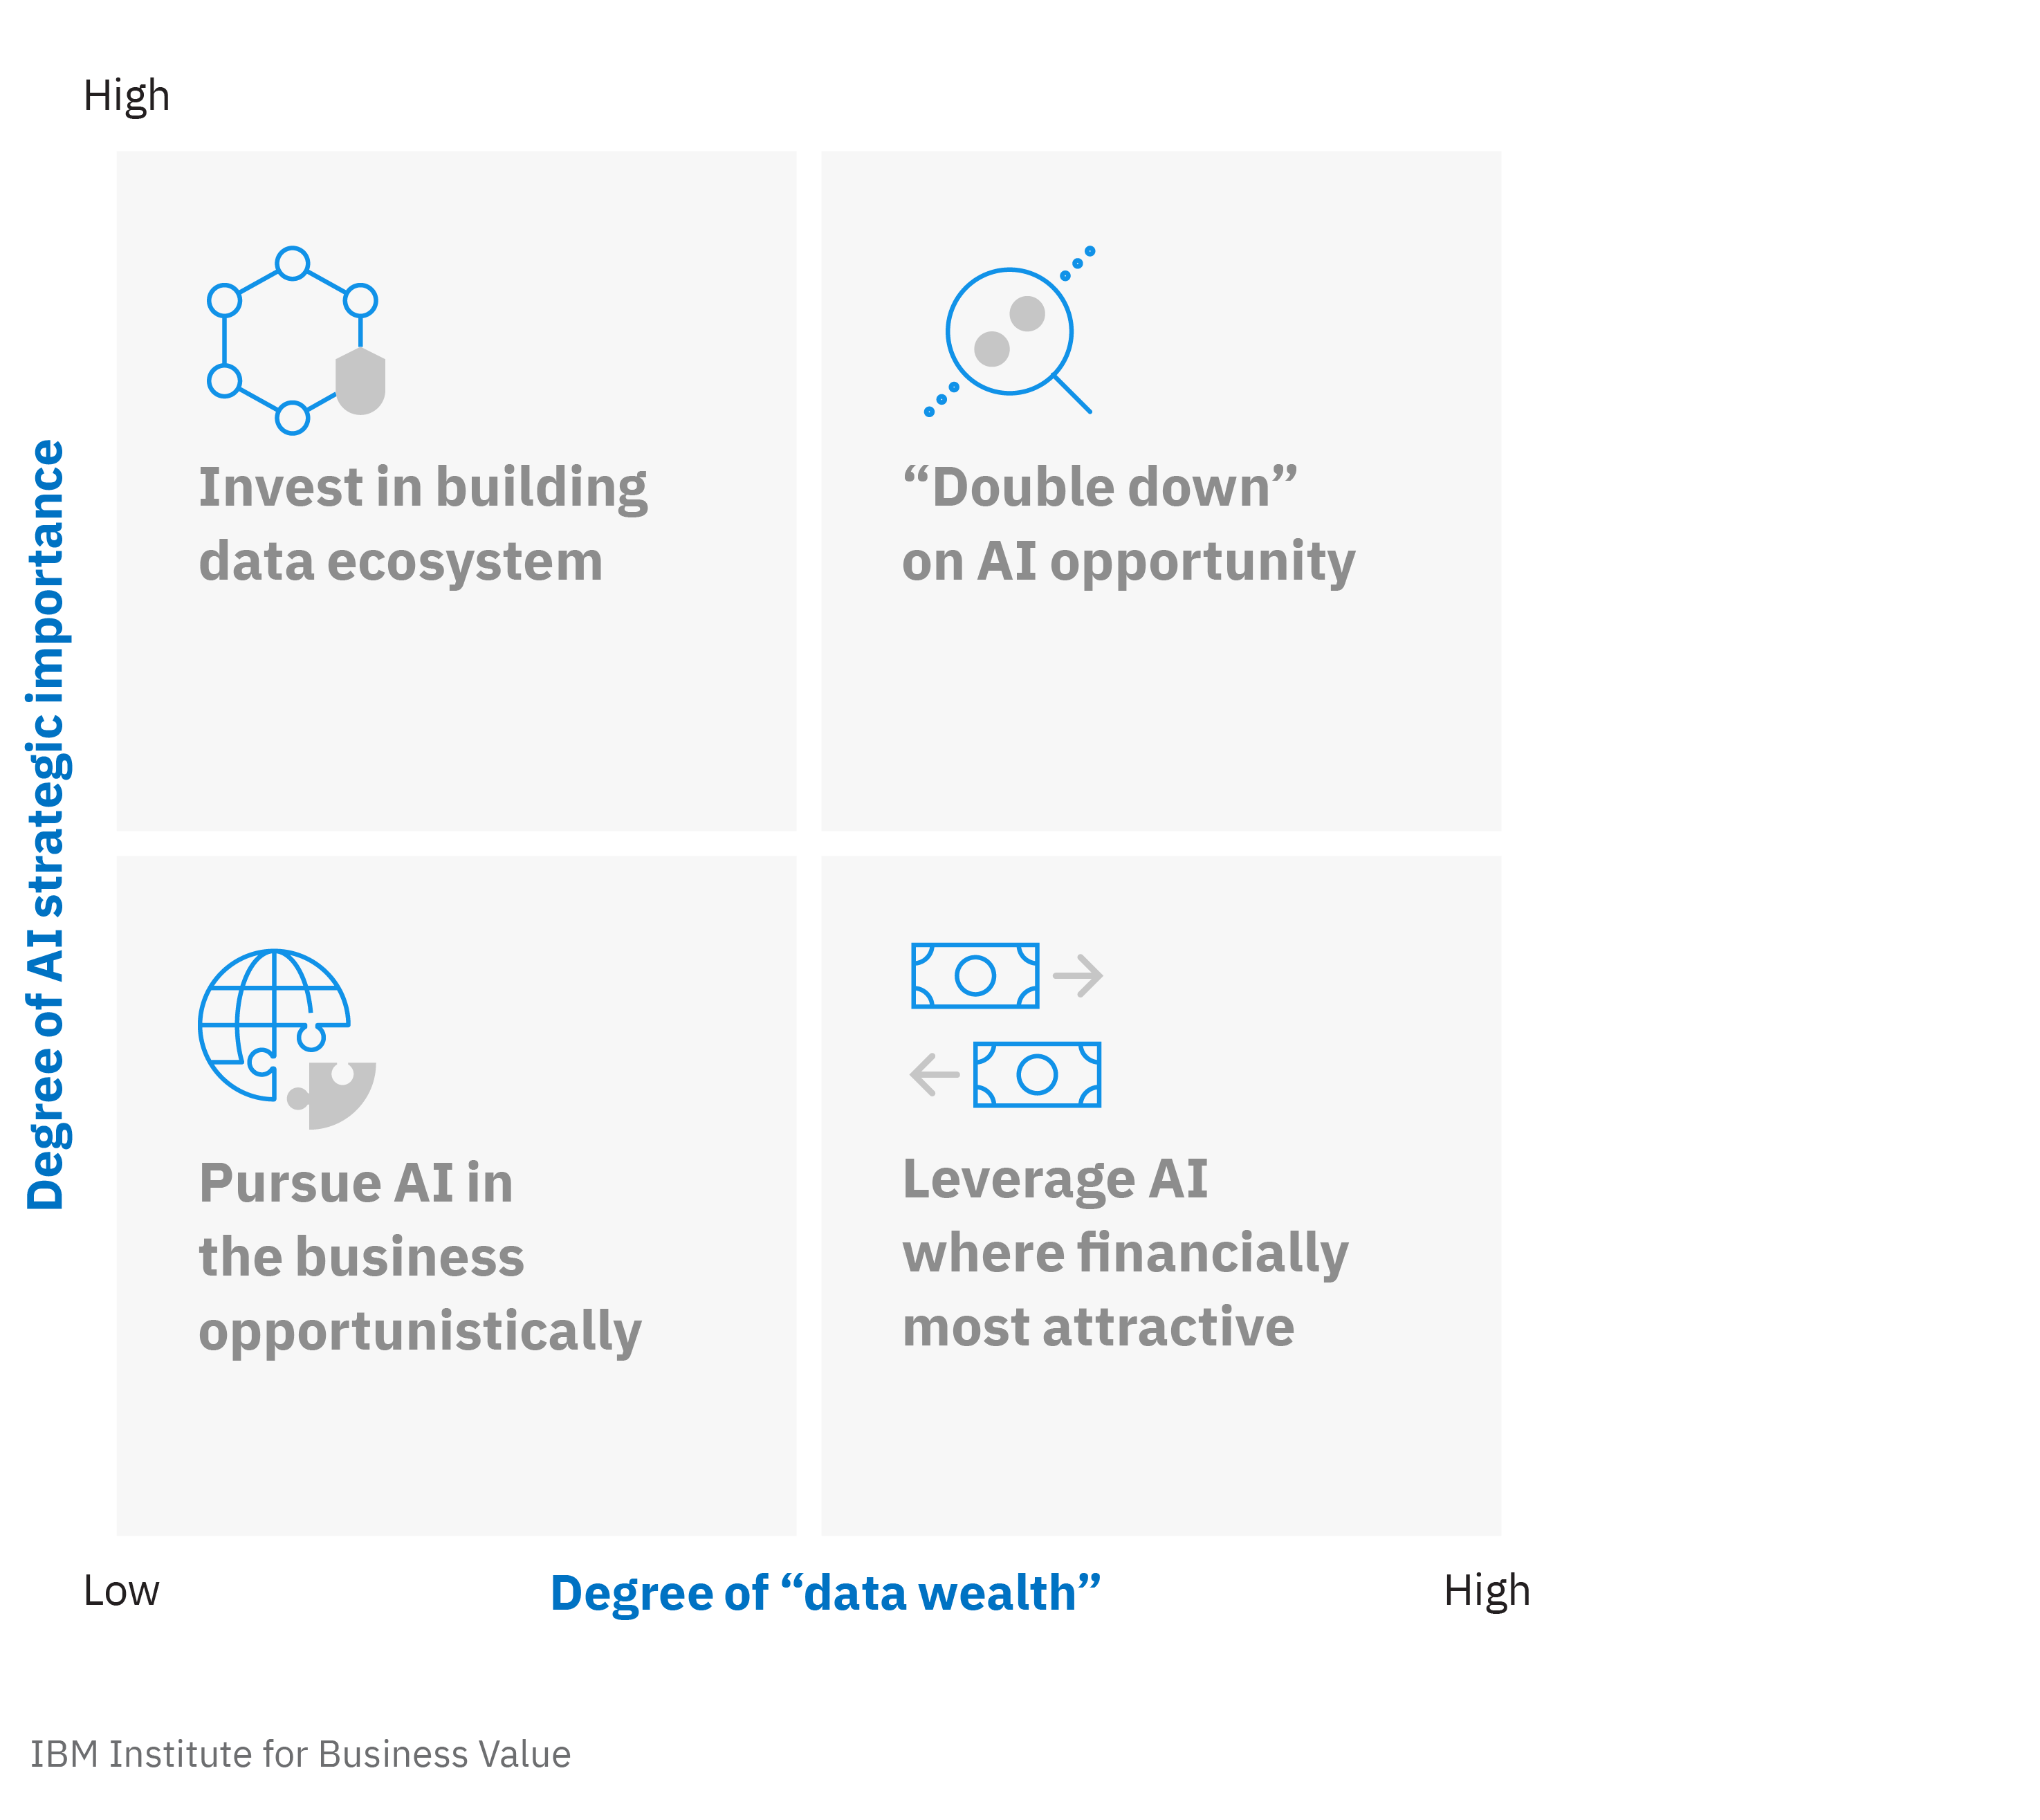 “Data wealth” versus AI strategic importance: These dimensions can help you determine your approach to AI.